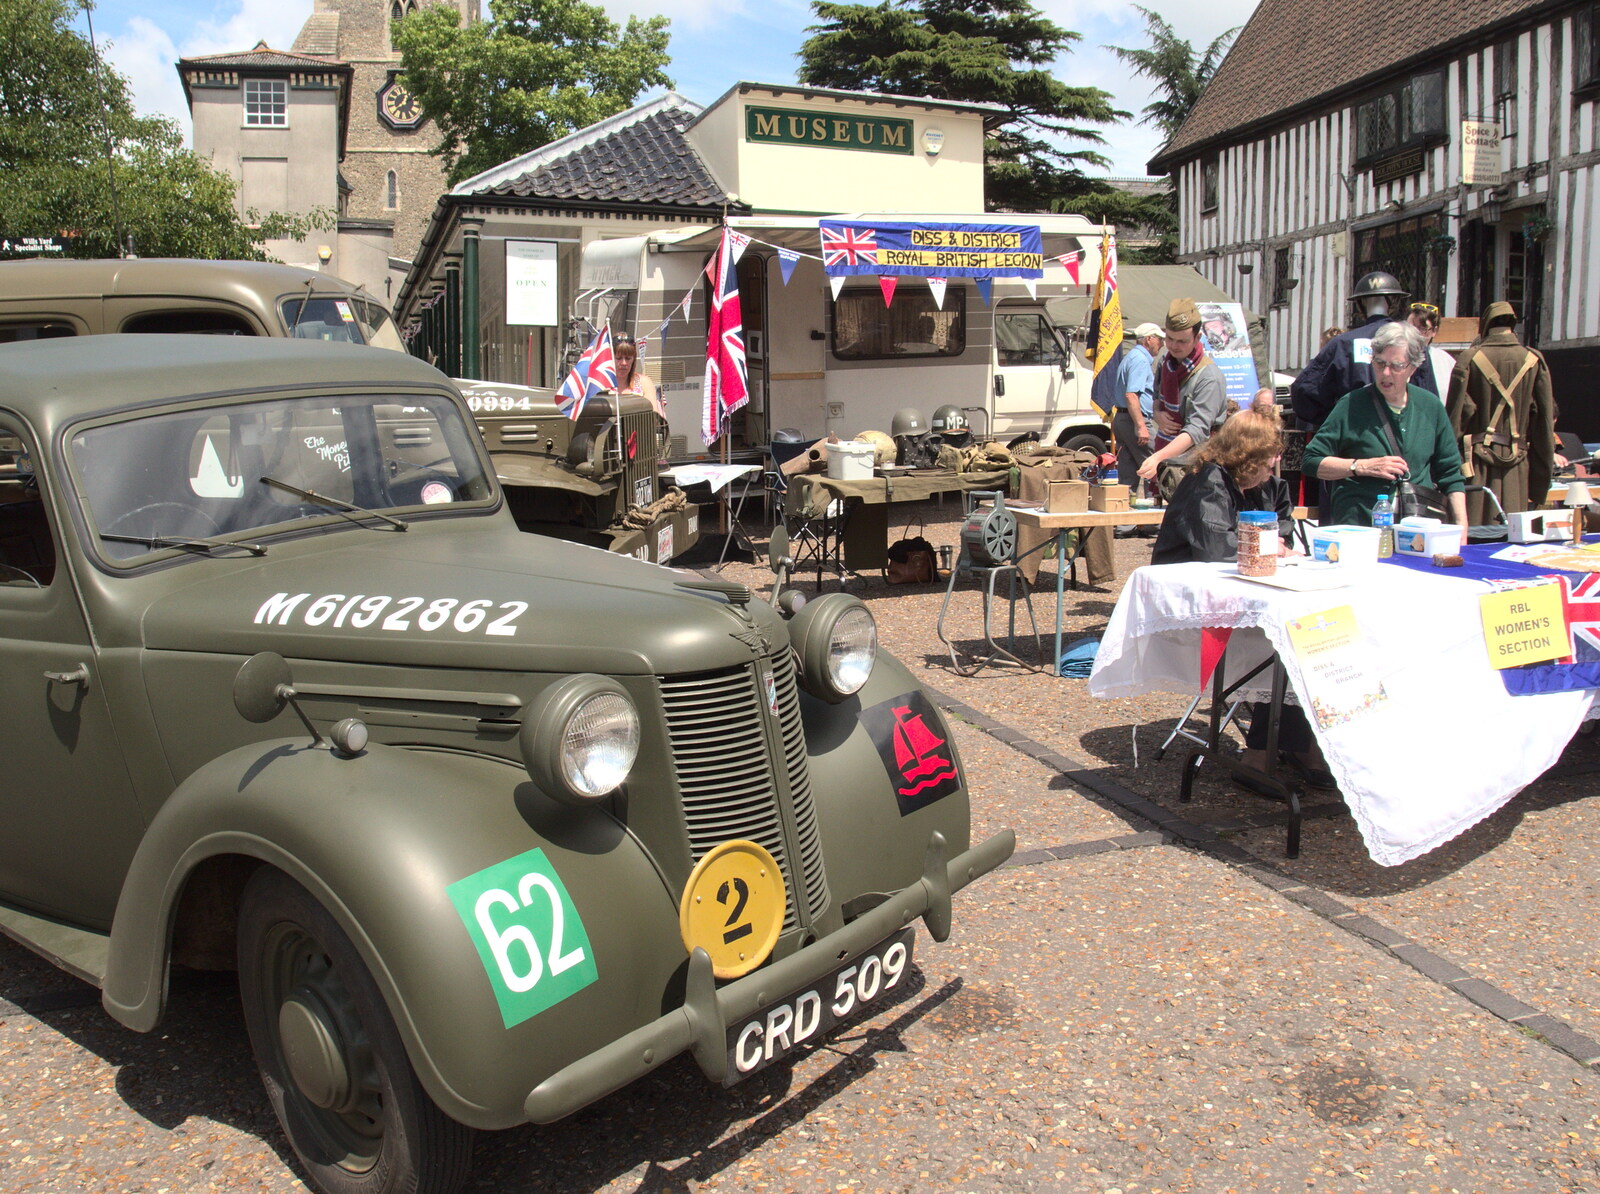 US Army staff car from A Busy Day and a Church Fair, Diss, Norfolk - 28th June 2014